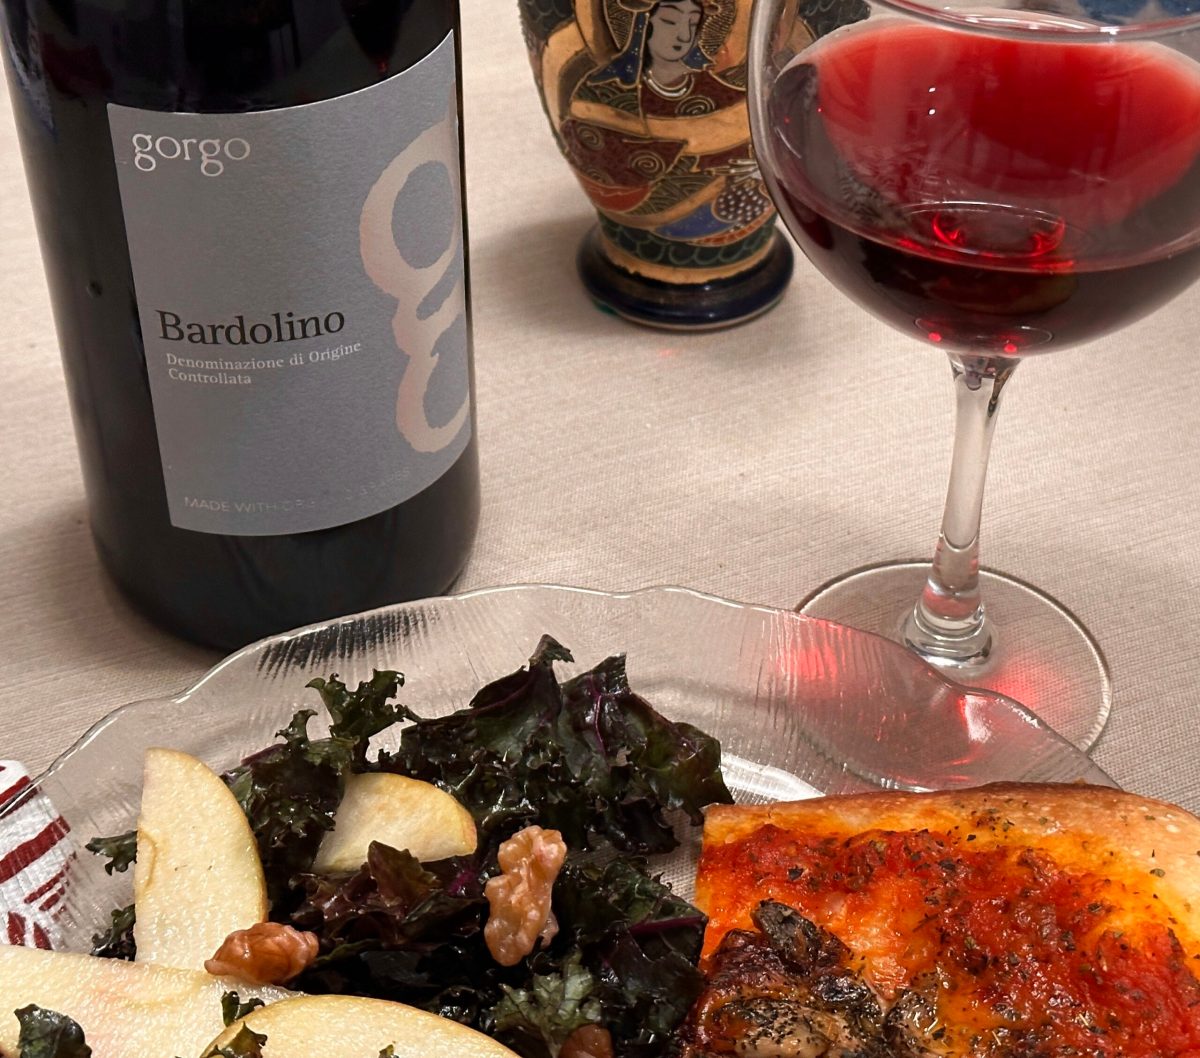 Pizza wine! Fresh, fruity and made from native Italian grapes (#ItalianFWT): Corvina and Rondinella. Let’s call them two gentle grapes of Verona. You may have met these indigenous Italian grapes in popular Valpolicella. Now I… bit.ly/3wJ1bwJ by @linda_lbwcsw #vino #wine